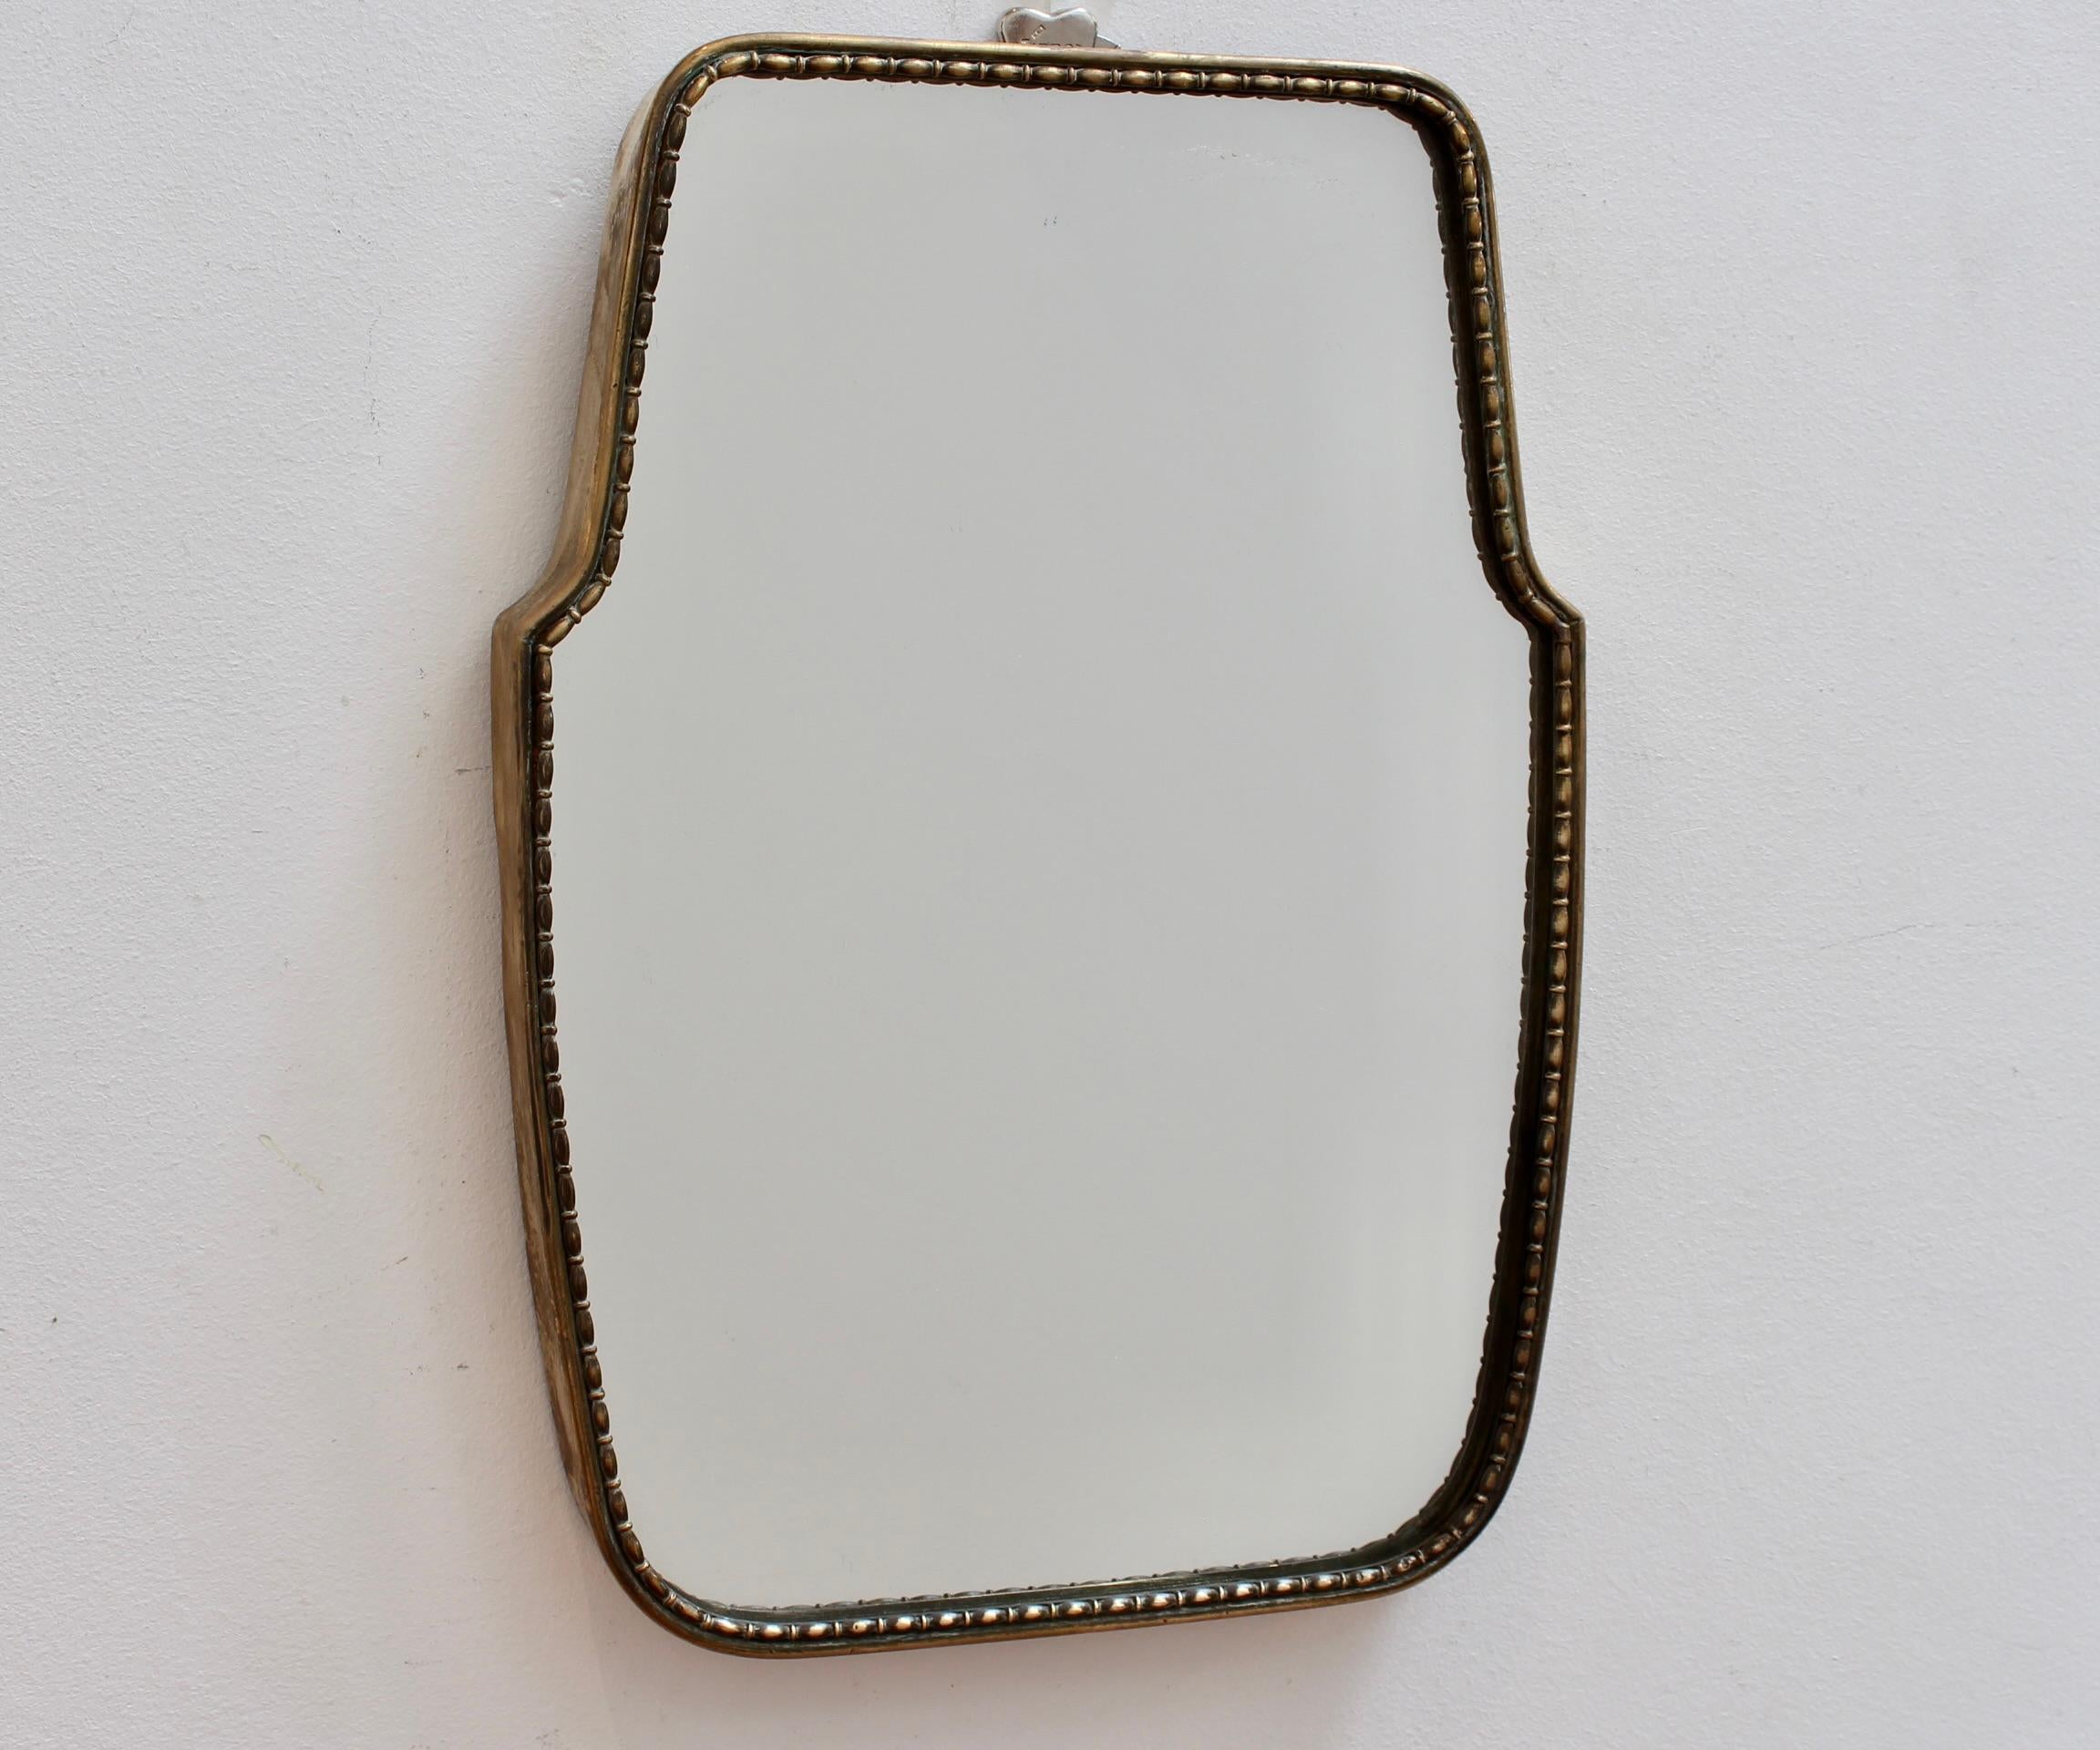 Mid-Century Italian wall mirror with brass frame and beading (circa 1950s). This mirror is simply elegant and characterful in a modern, Gio Ponti style. It is a relatively small size, classically shaped, with a delightful beading adding visual